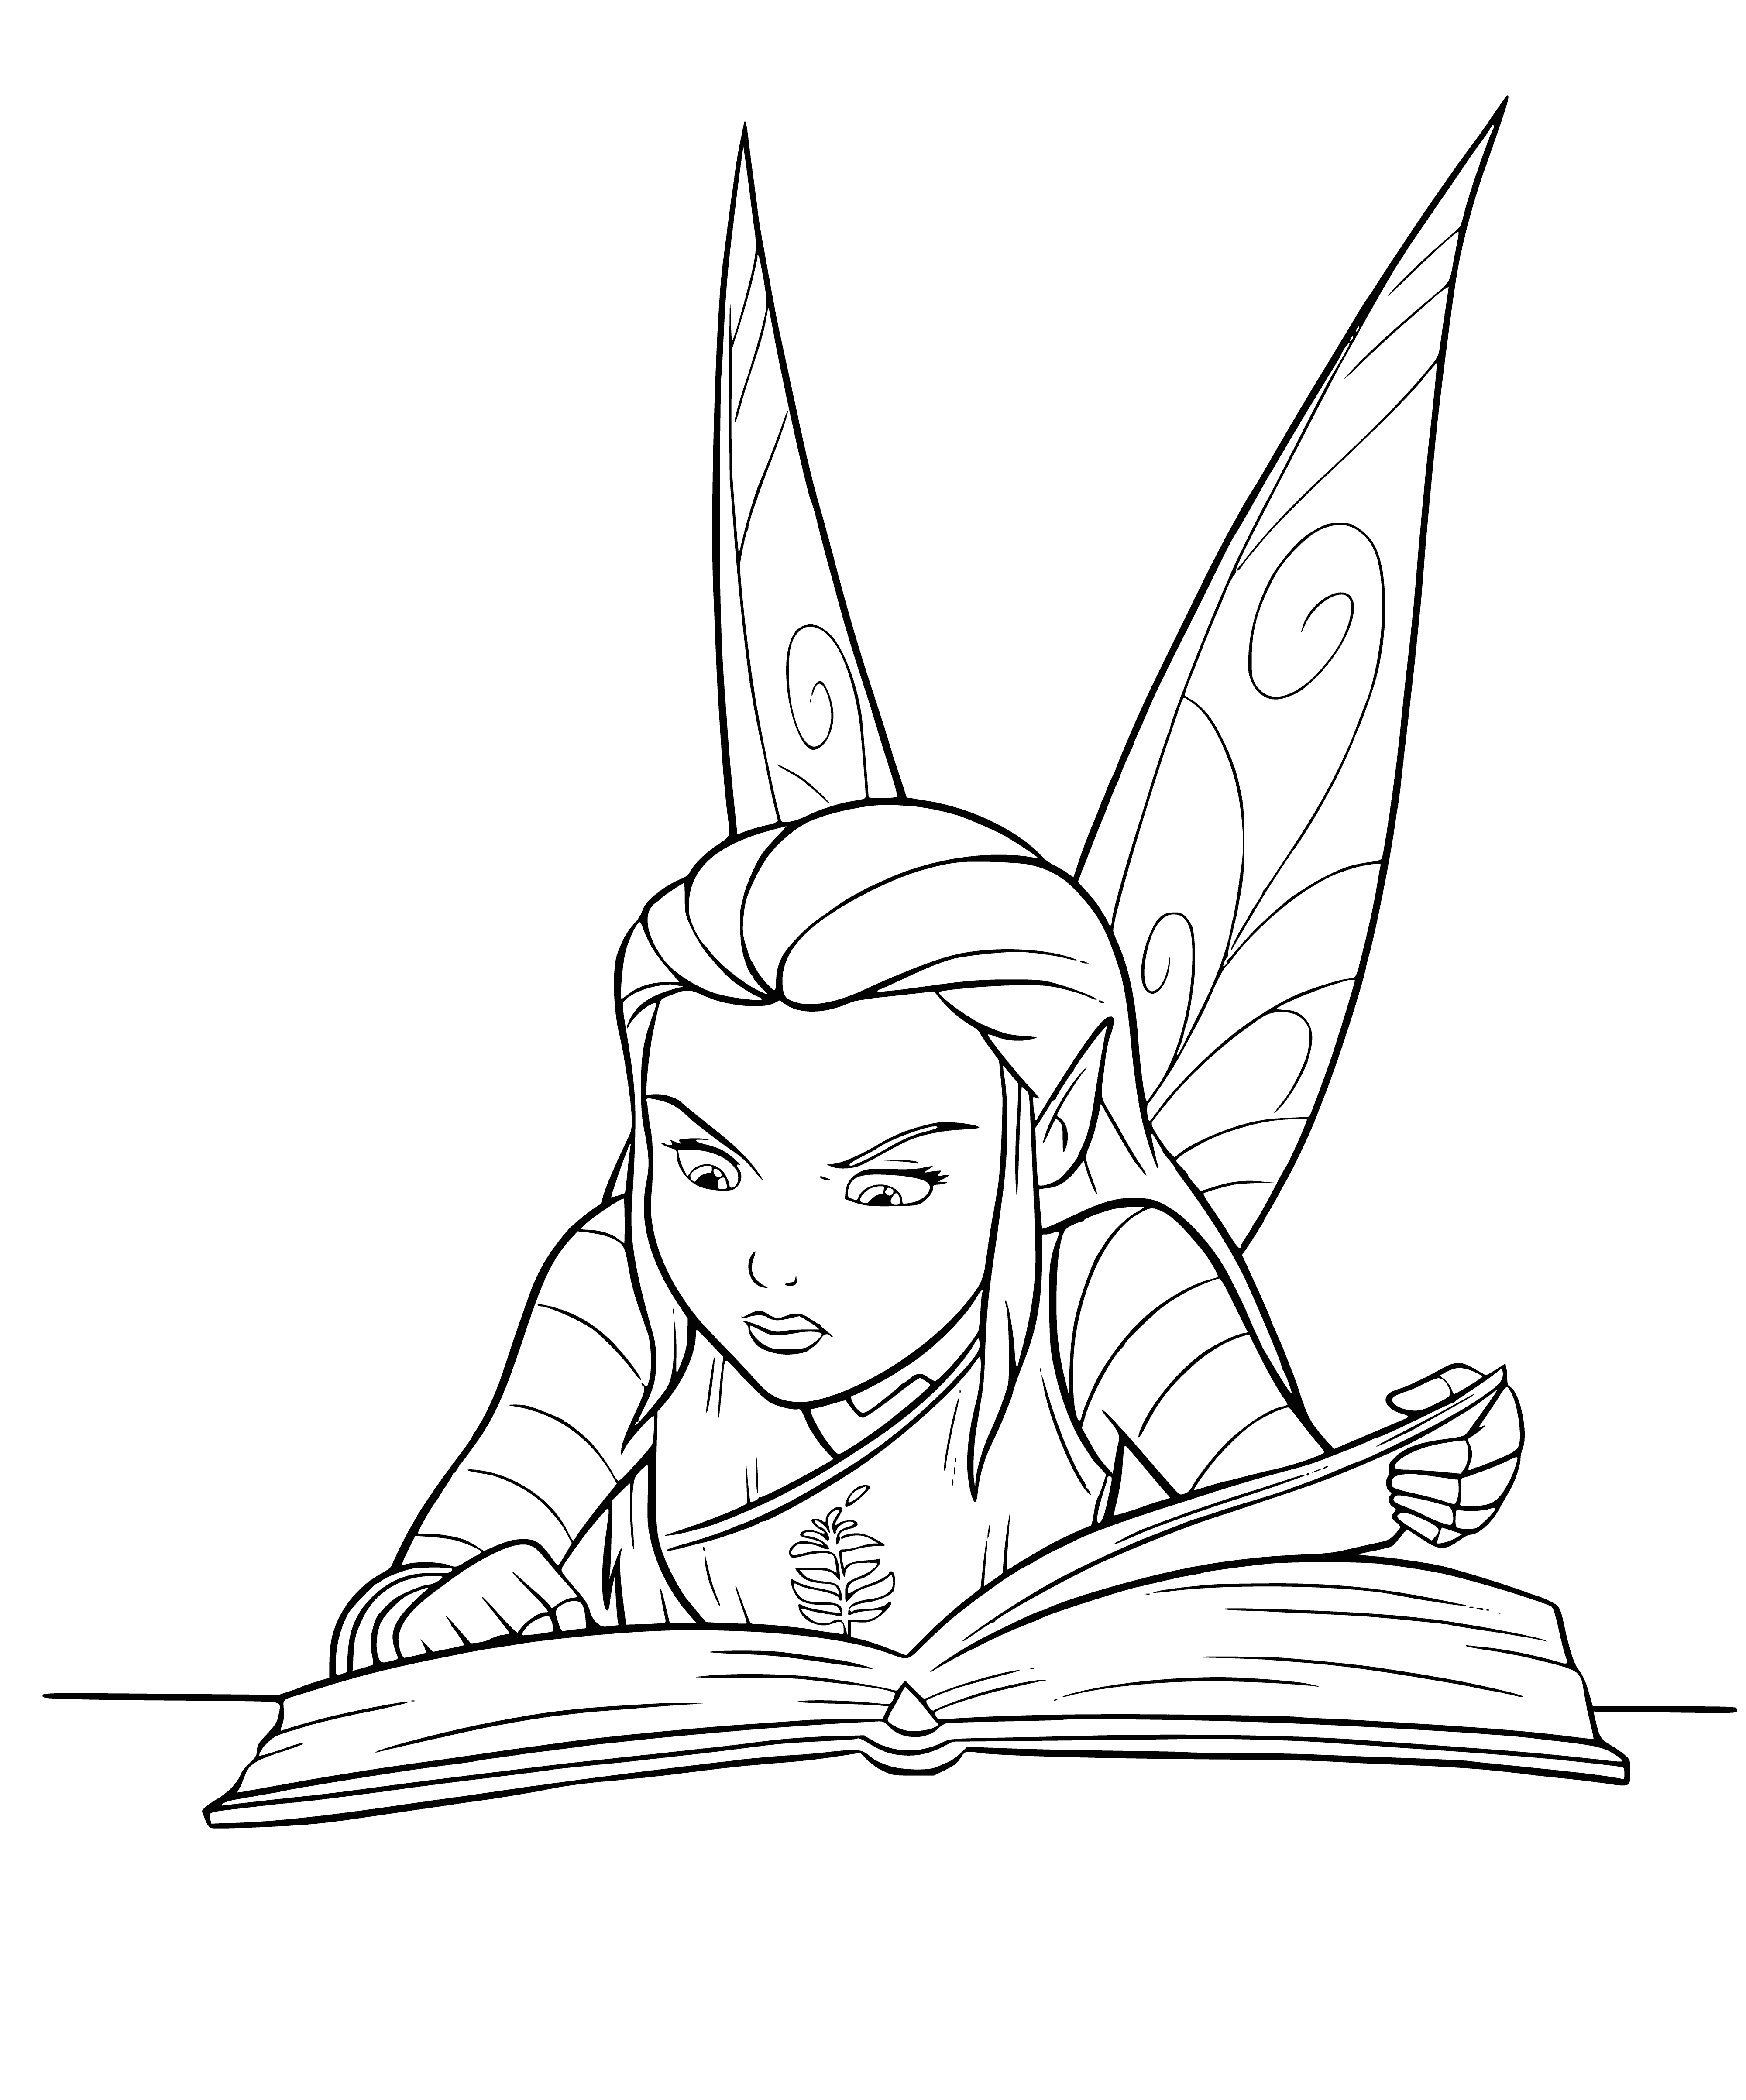 coloring page: Nyx is a powerful fairy hunter who uses her bow and tracking skills to protect magical creatures from any danger.